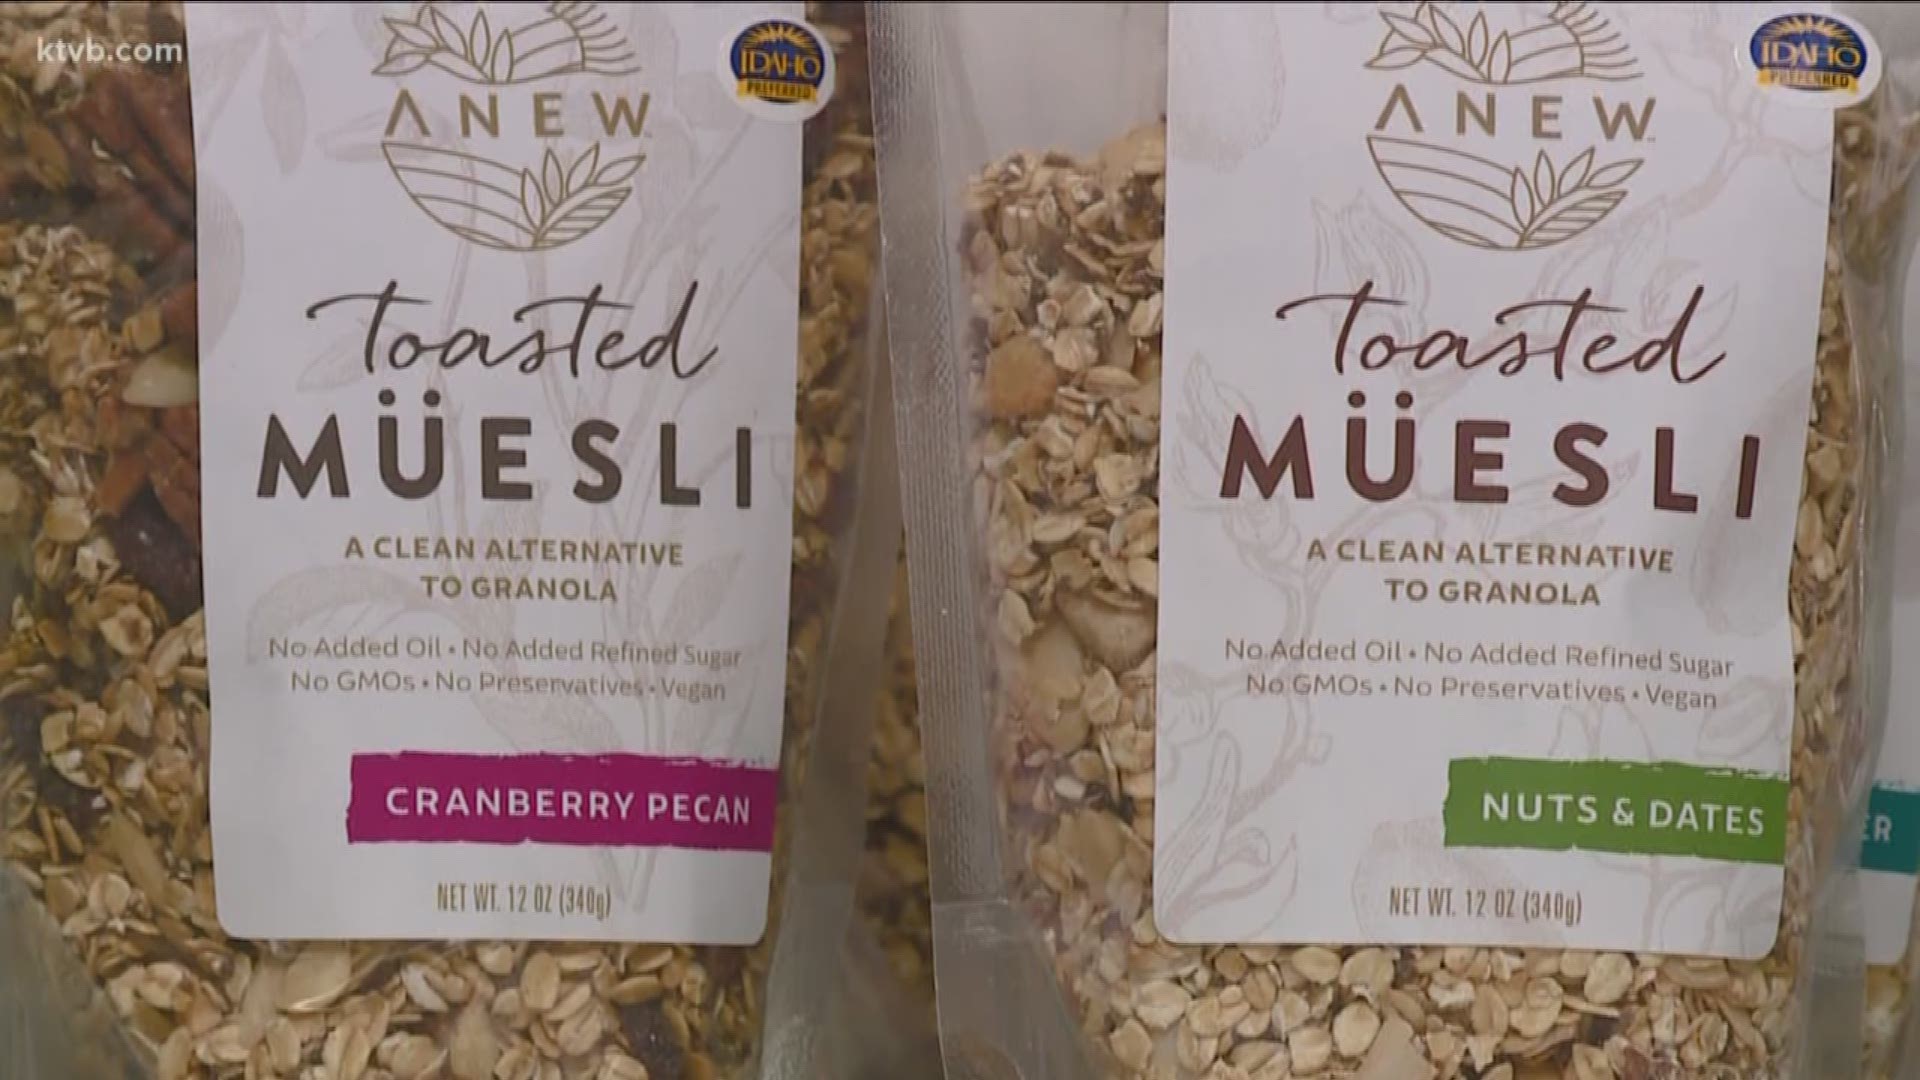 A local woman is bringing some new foods to Idaho.